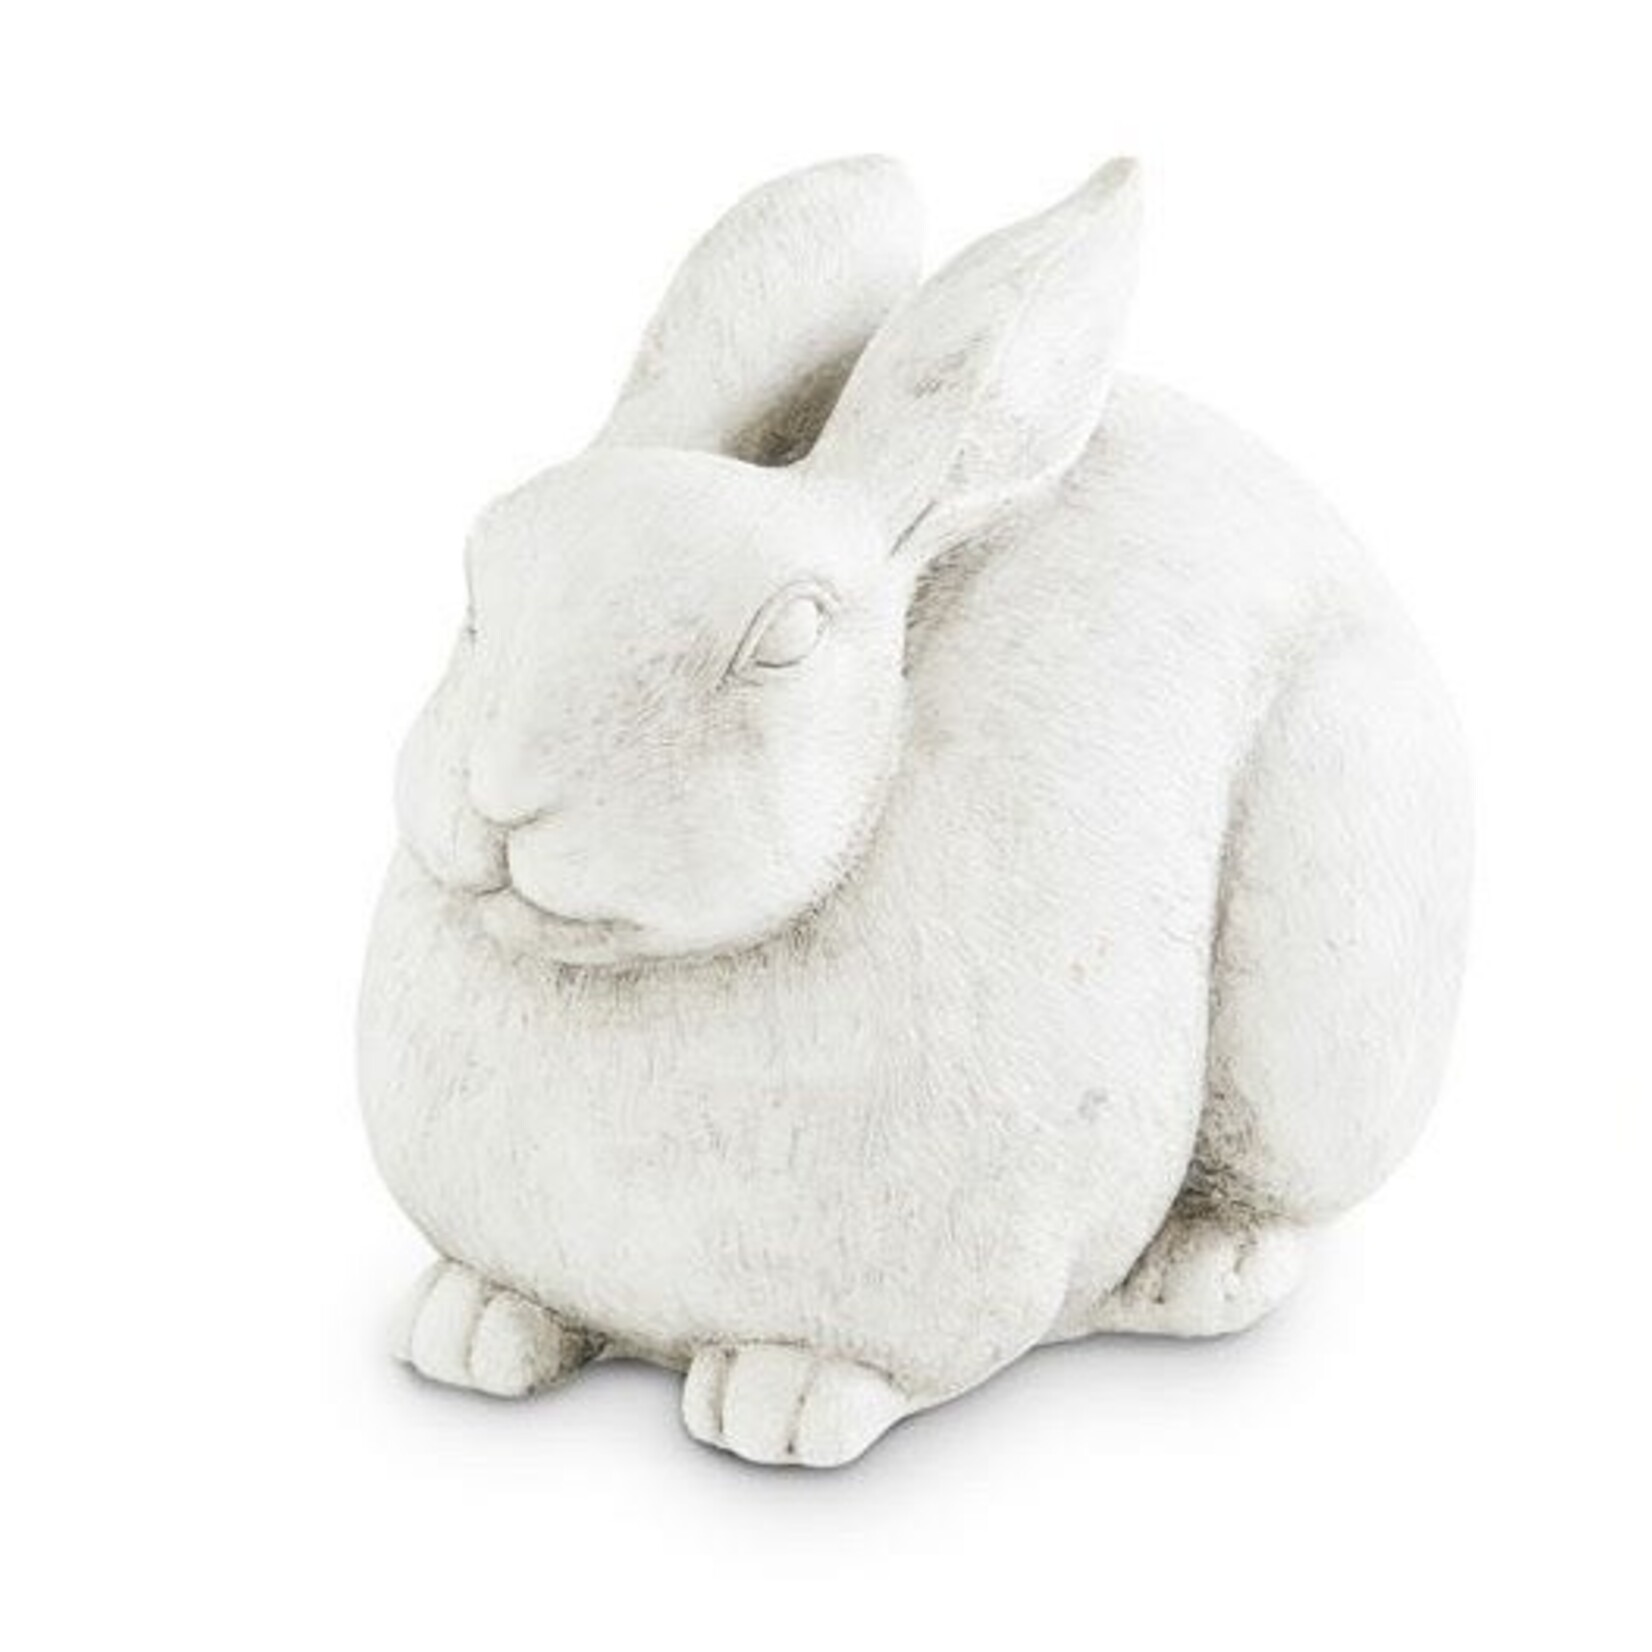 9 Inch White Resin Rabbit Sitting & Looking Straight